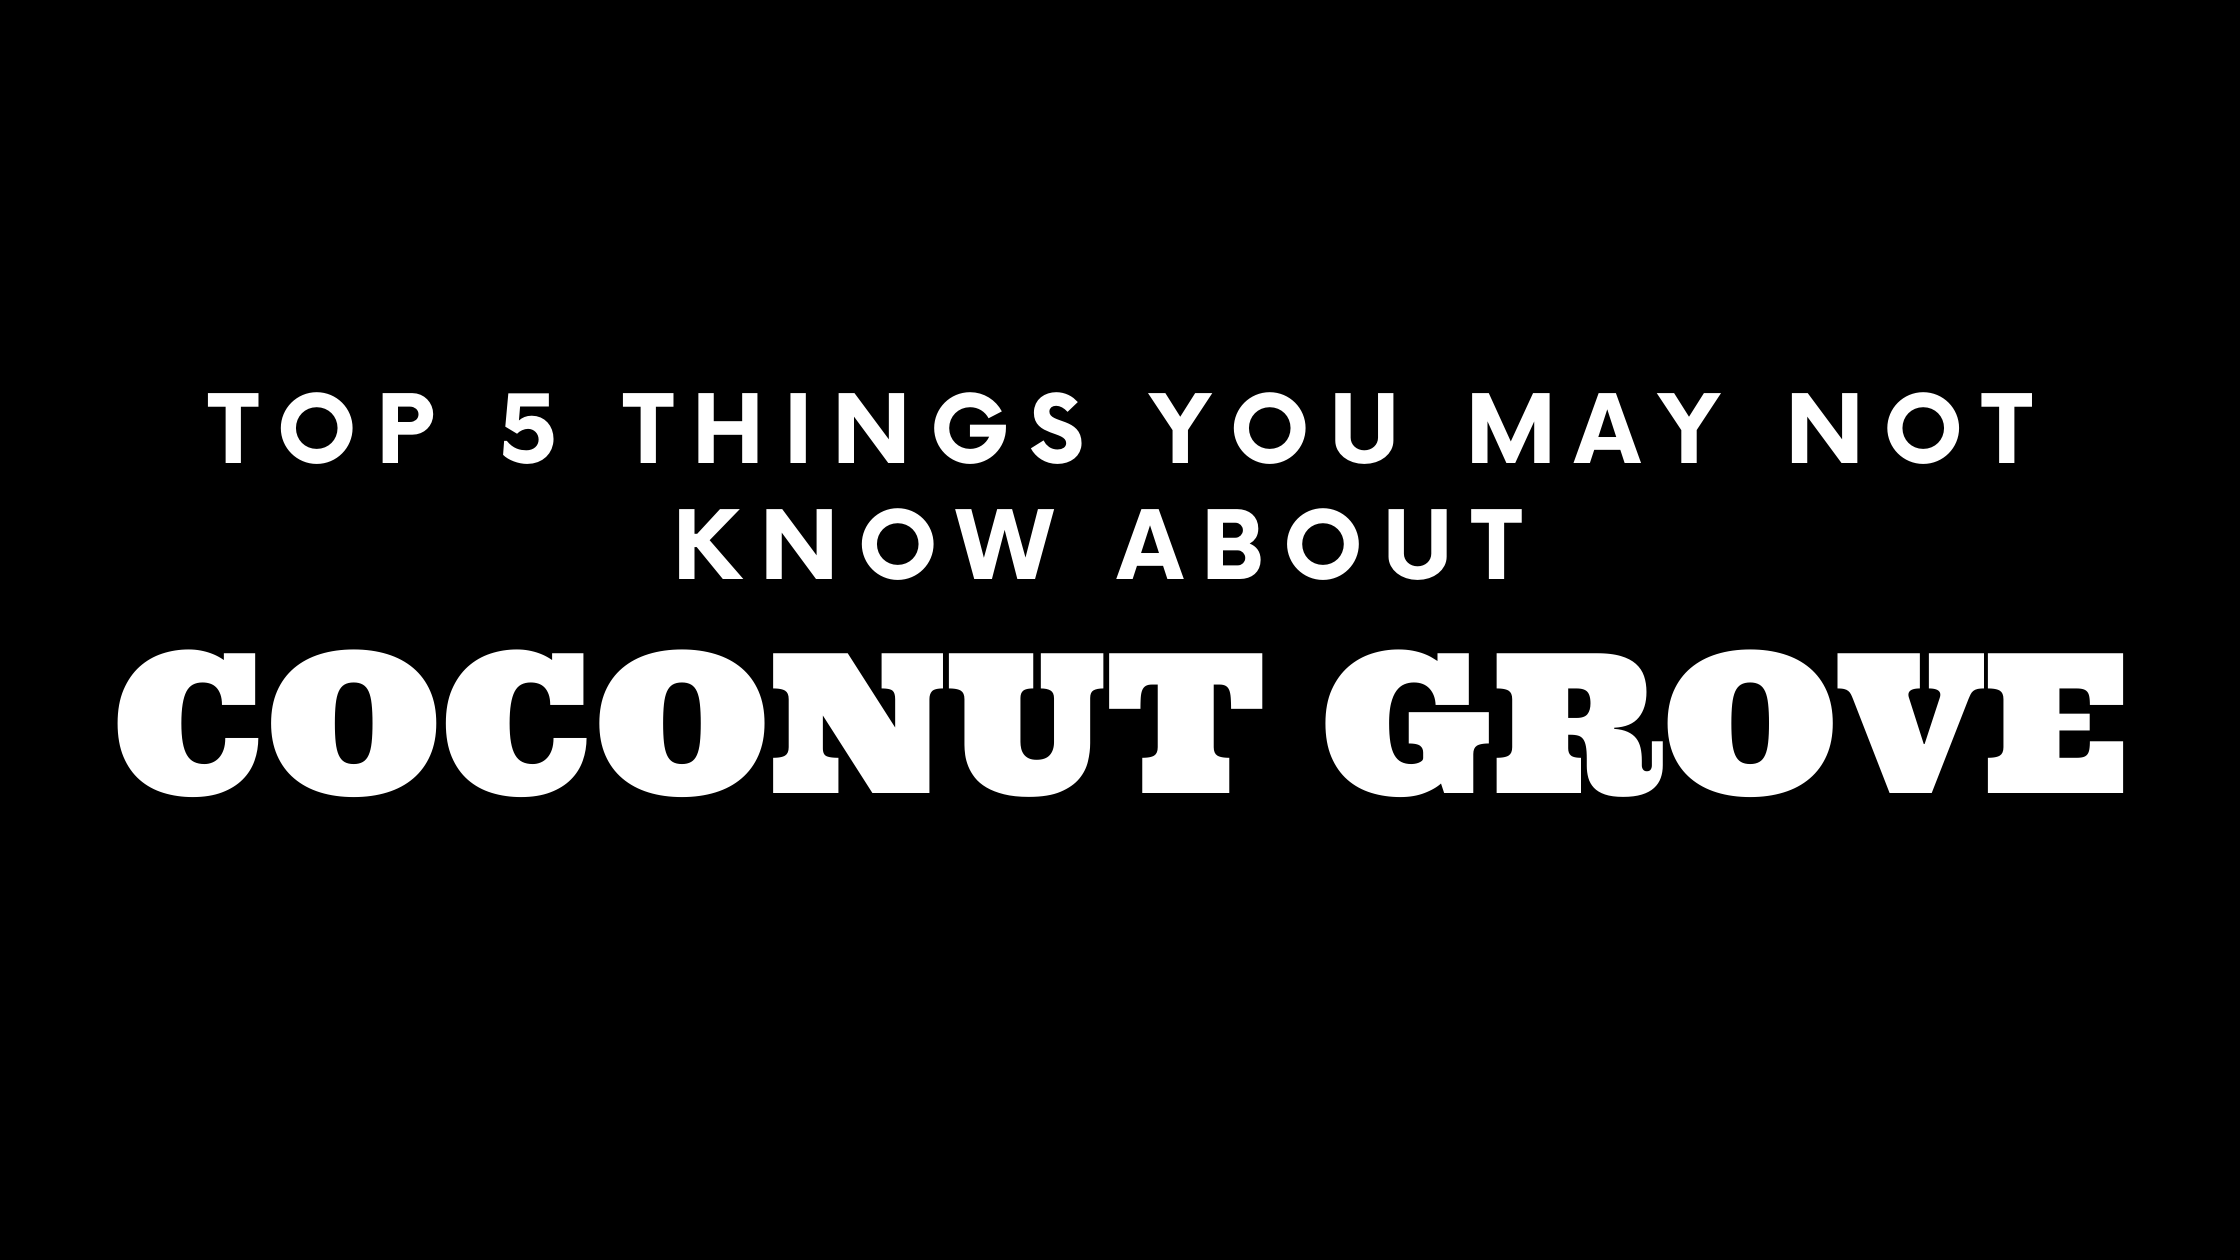 Top 5 Things You May Not Know About Coconut Grove